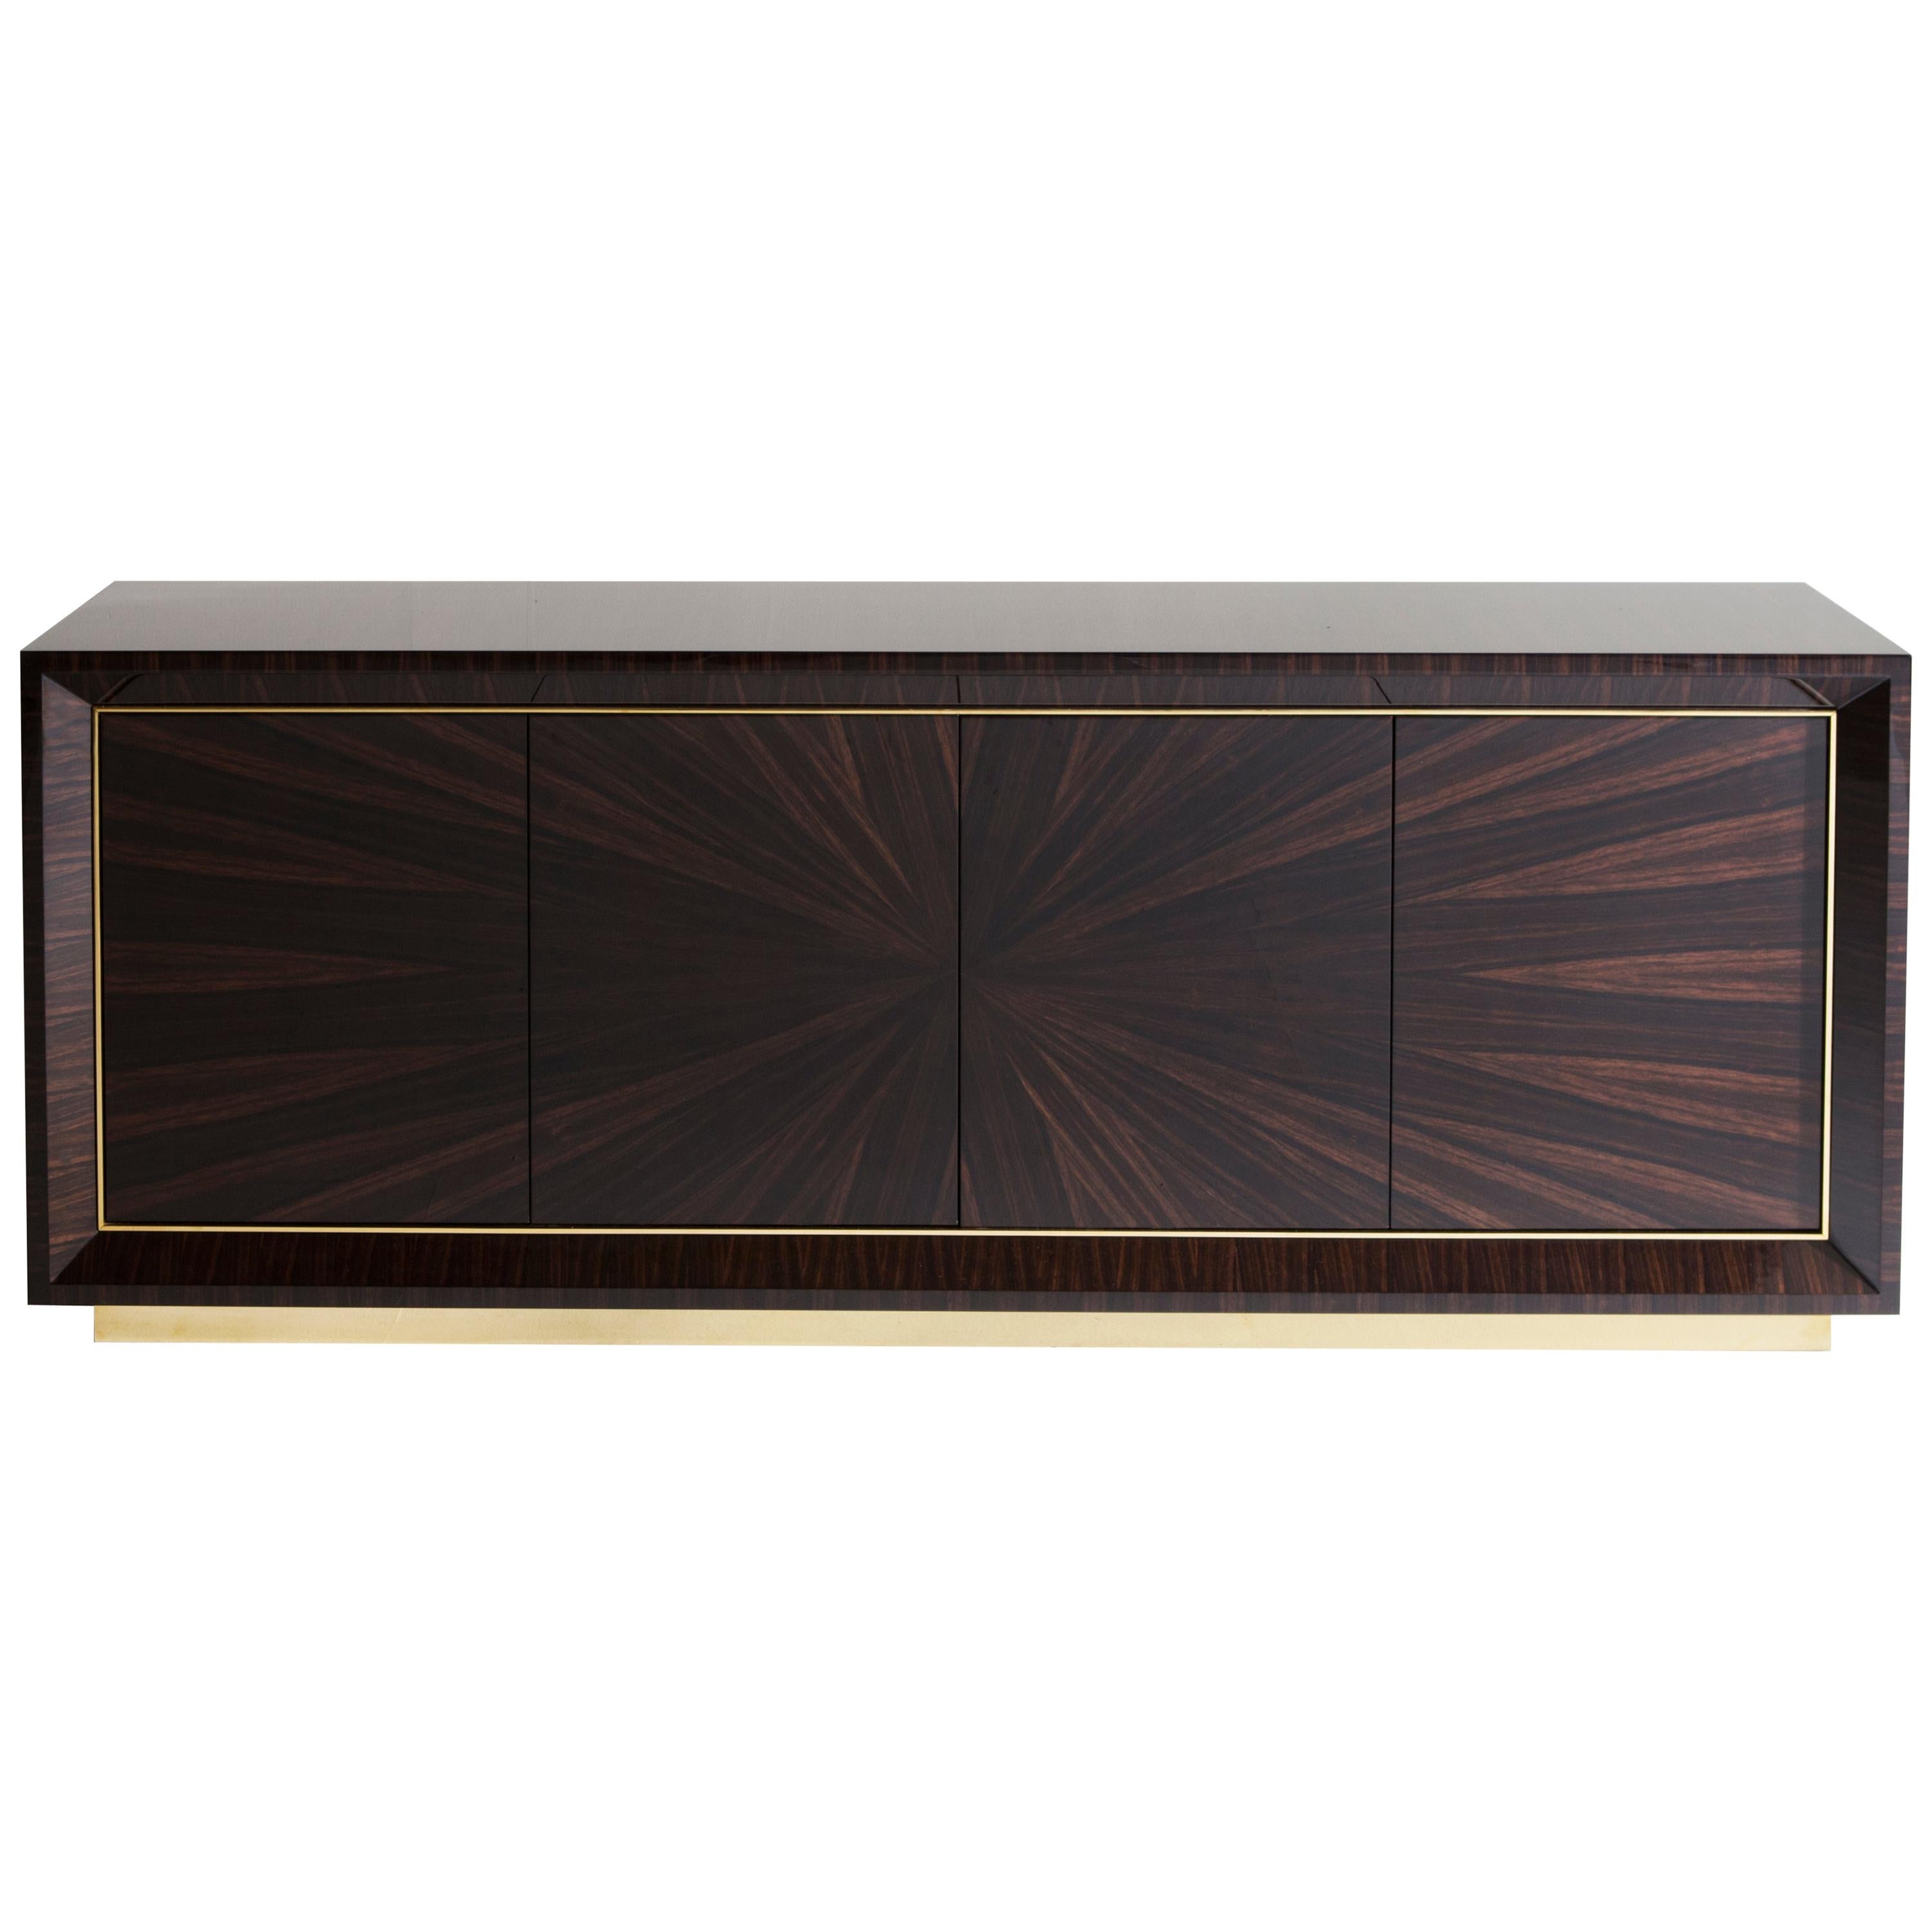 Davdson's Chiltern Cabinet, in Dark Macassar Ebony with Polished Brass Detailing